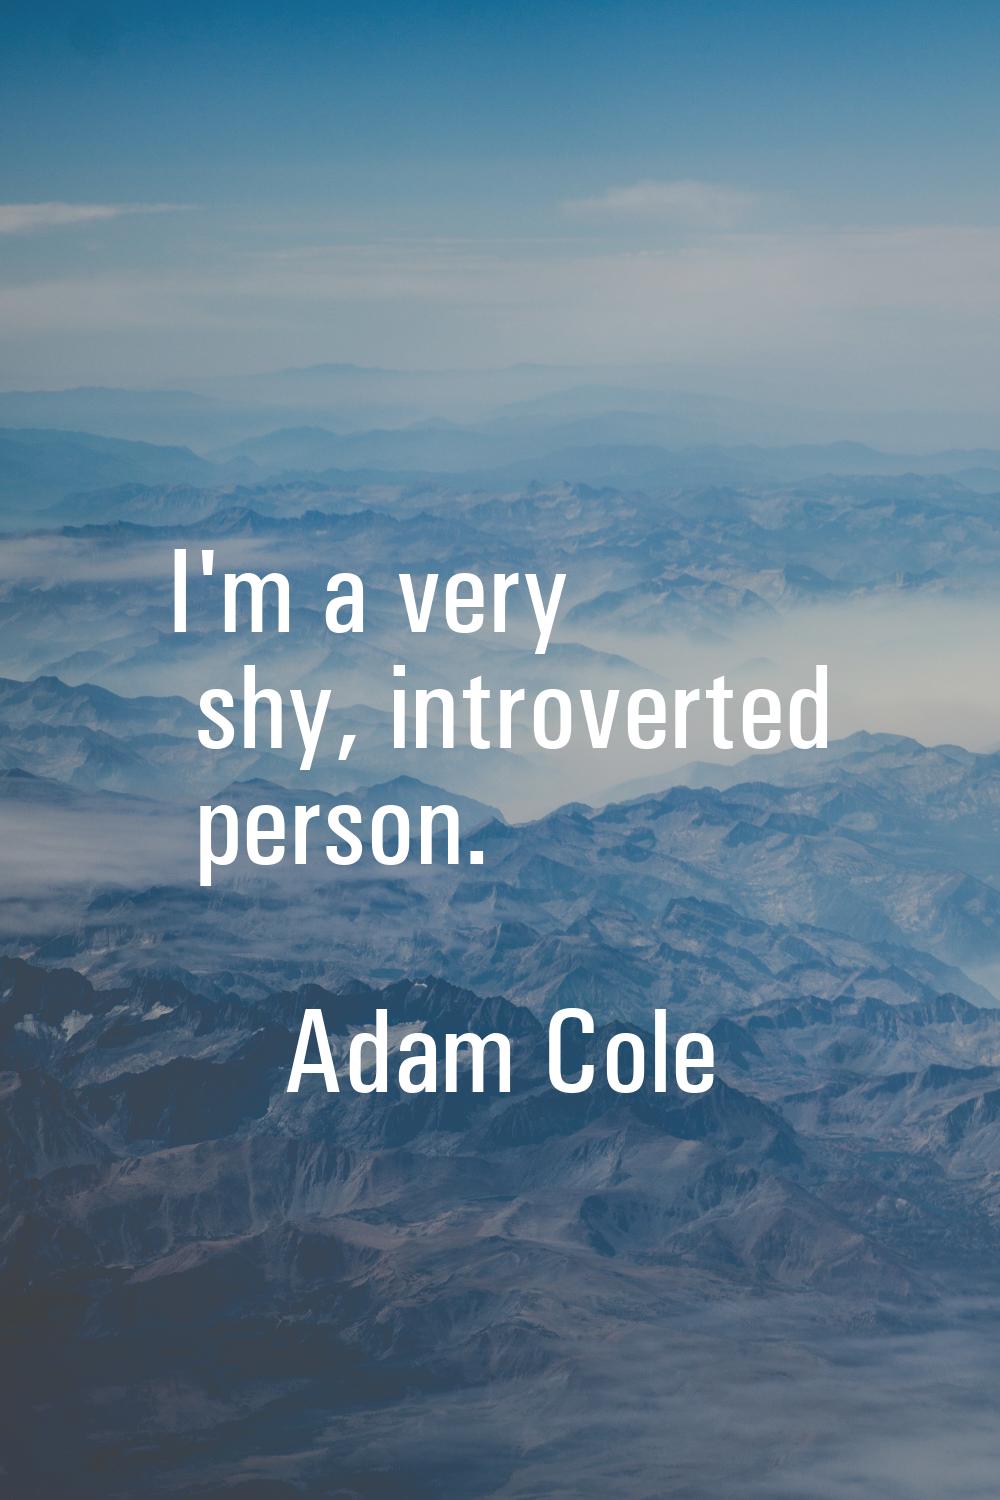 I'm a very shy, introverted person.